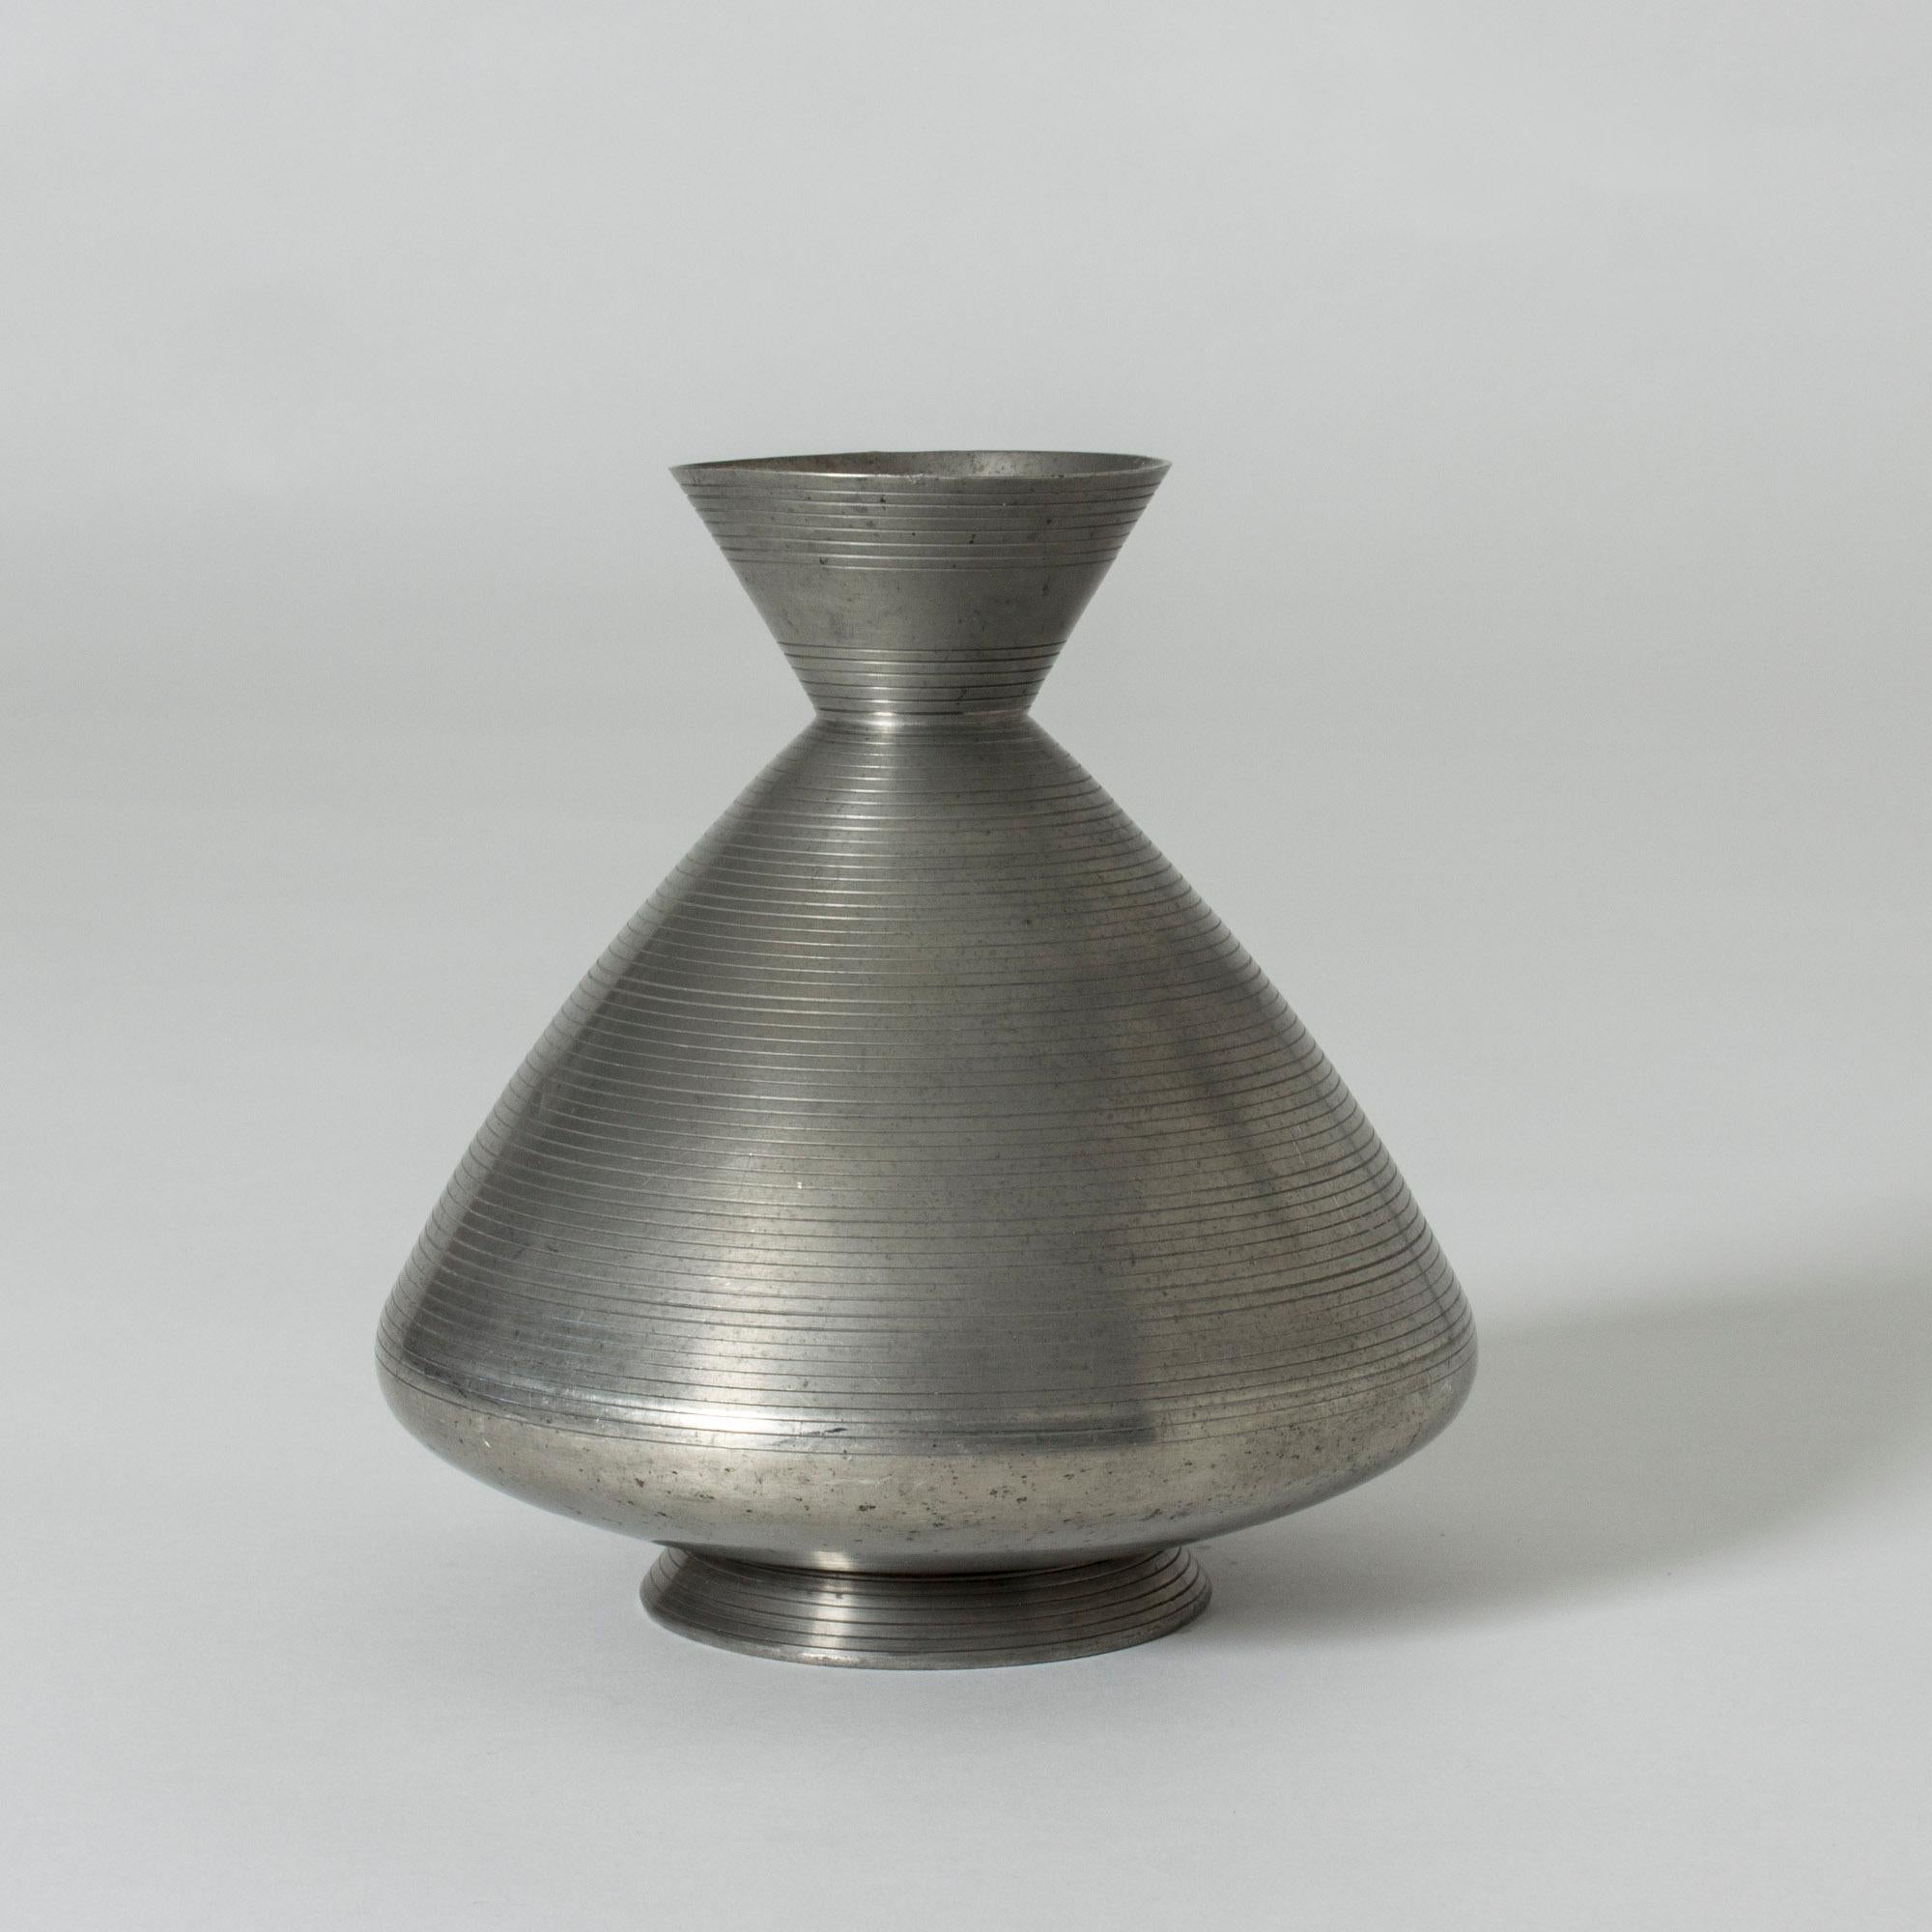 Pewter vase by Swedish Industrial designer Sylvia Stave, for C.G. Hallbergs Guldsmeds AB, later GAB, where Stave was creative director from 1931-1939. Minimalistic design with great proportions and subtle pattern of lines.